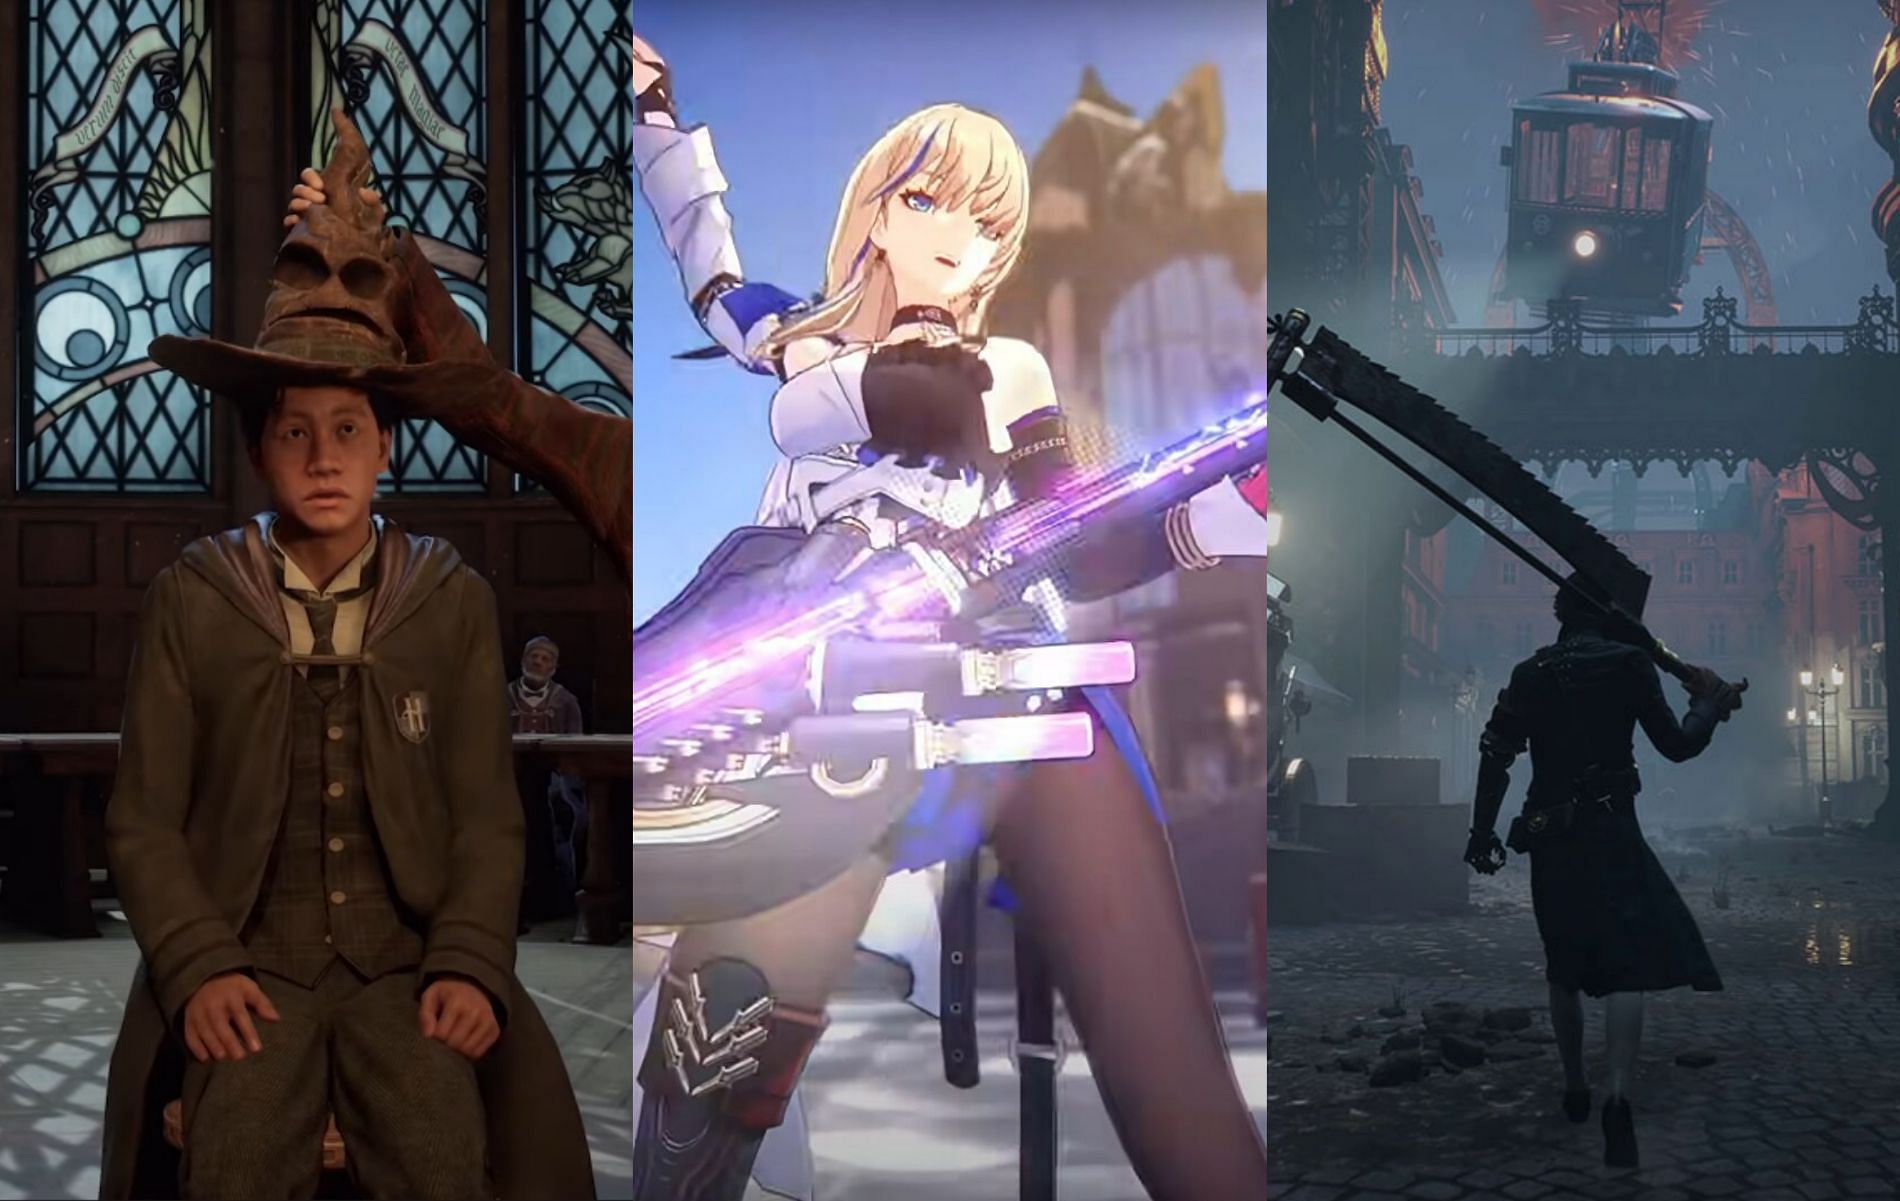 Gamescom 2022 Opening Night Live air time and title showcases confirmed so far (Images via Hogwarts Legacy, Honkai: Star Rail, and Lies of P)